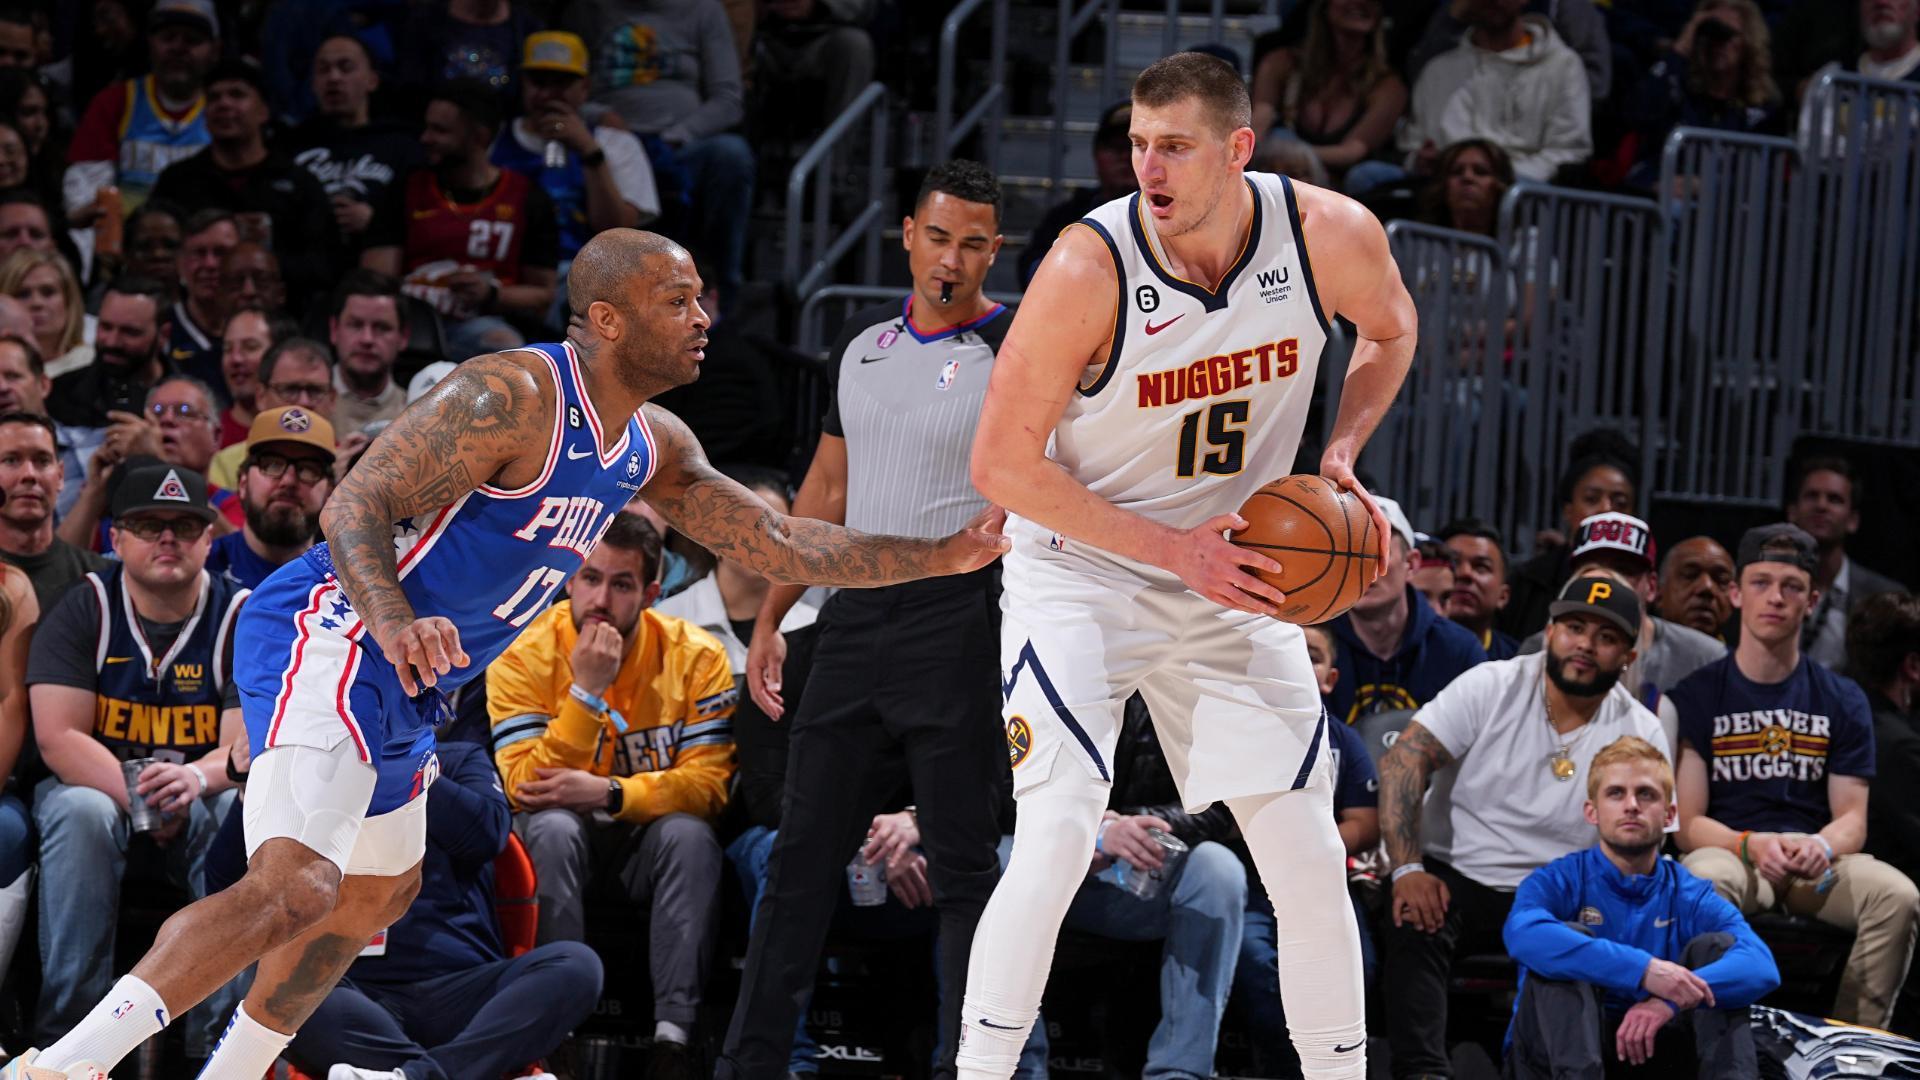 Embiid sits out, Jokic leads Nuggets past 76ers 116-111 - 6abc Philadelphia